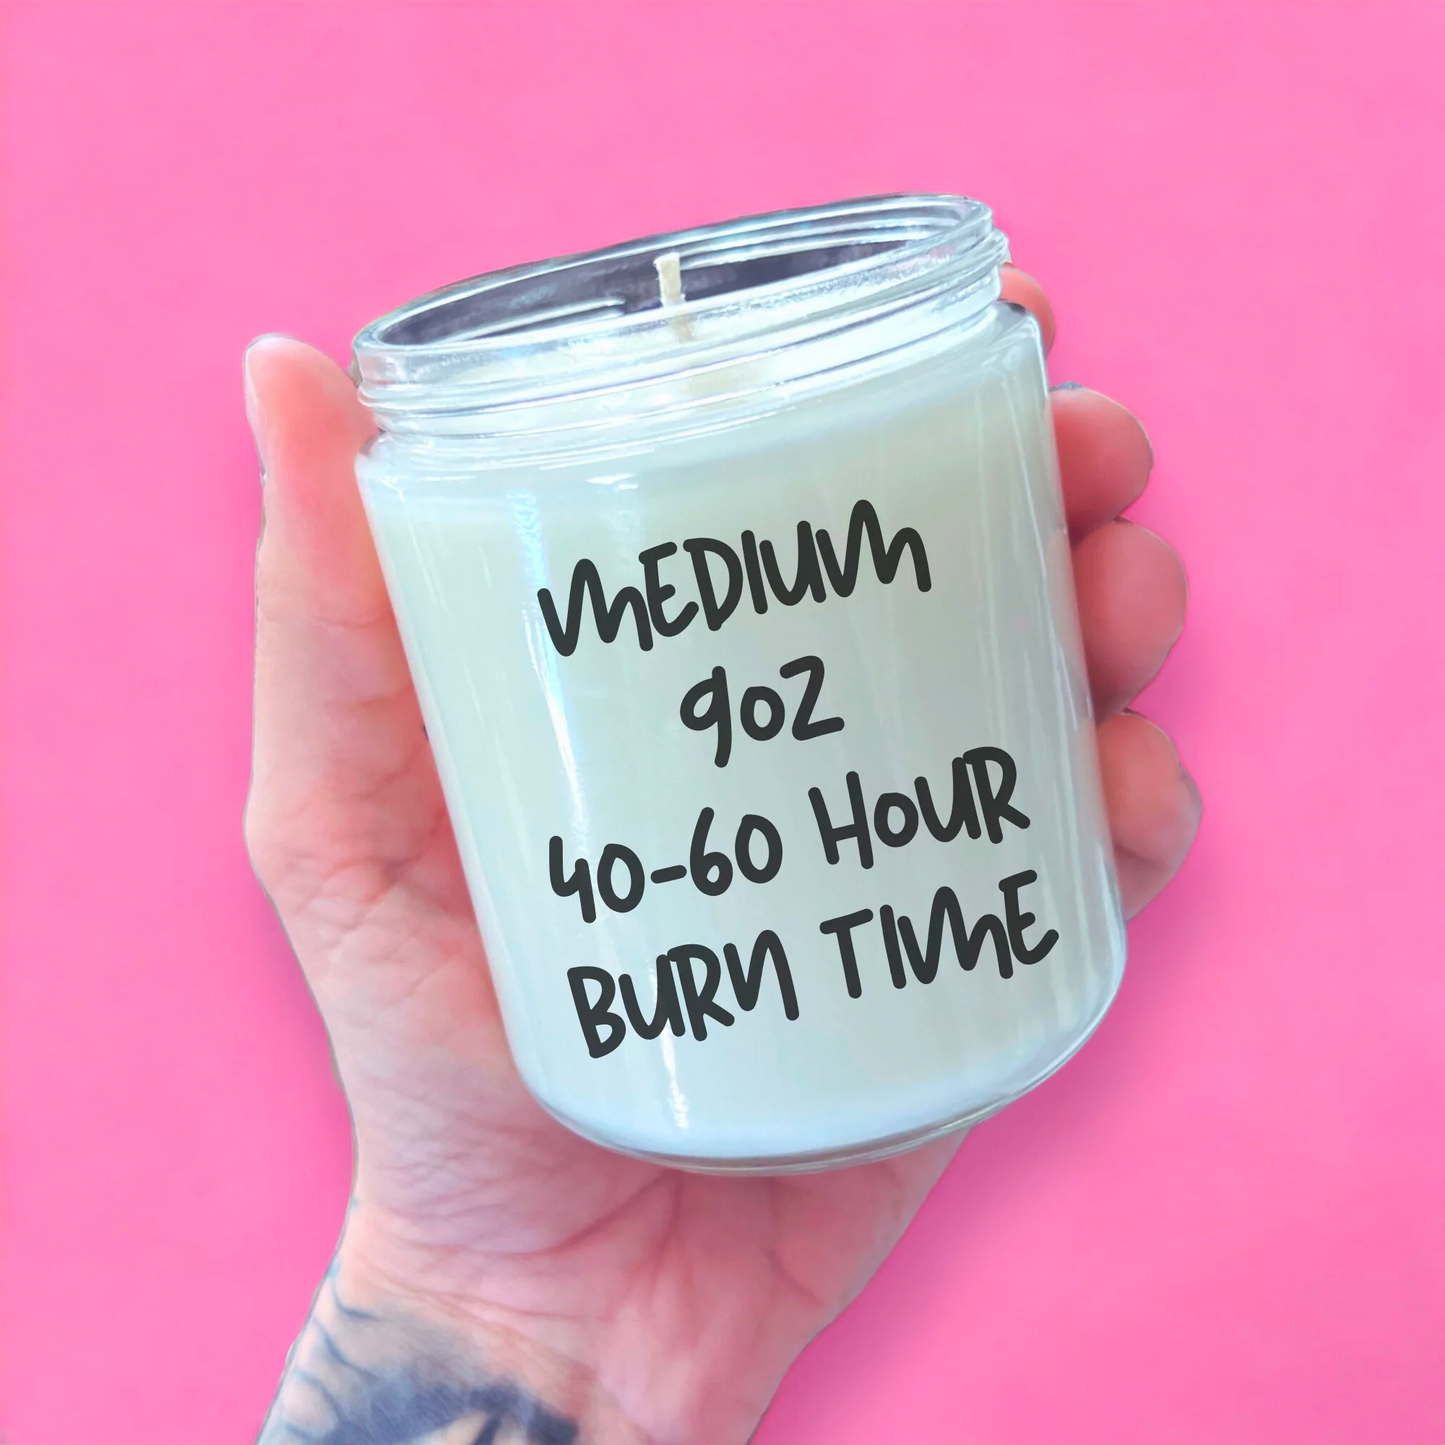 a person holding a candle that says medium goz 40 - 60 hour burn time